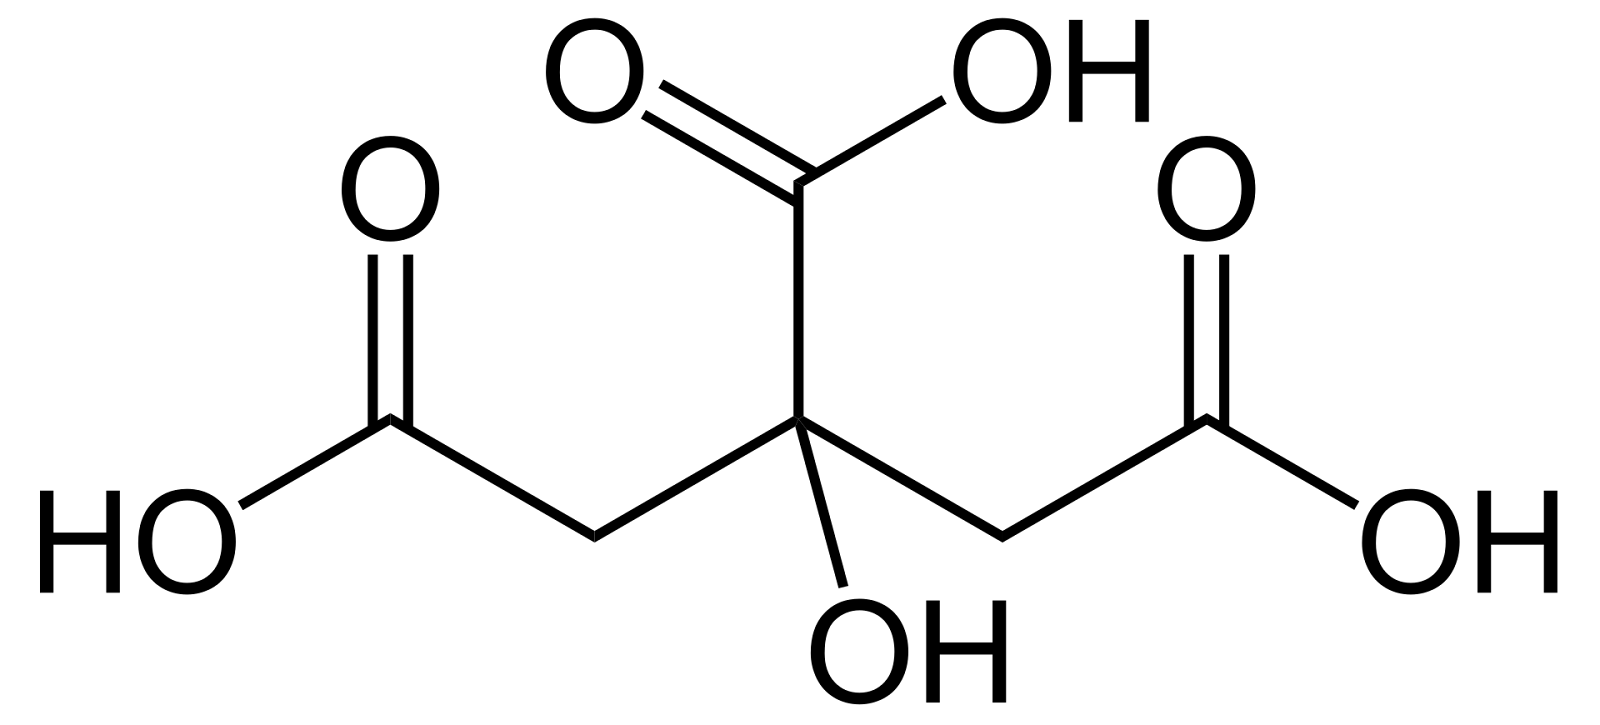 chemical structure of citric acid 